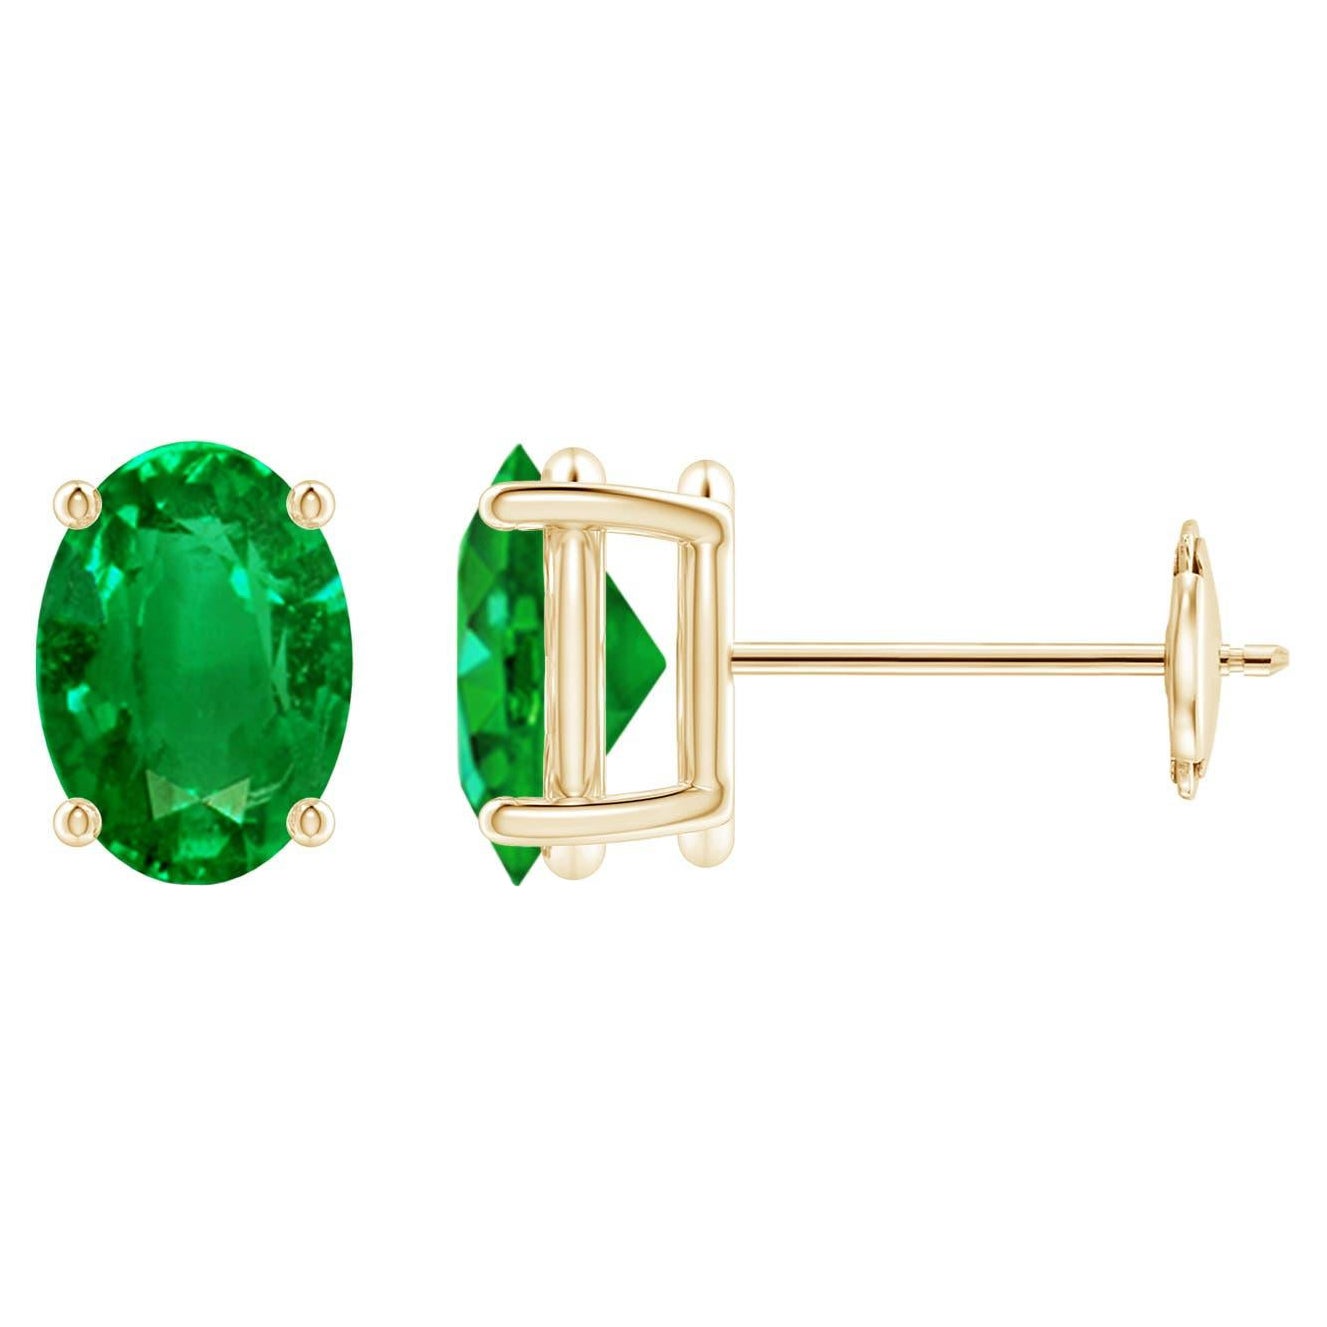 Natural Solitaire Oval 1.32ct Emerald Stud Earrings in 14K Yellow Gold 